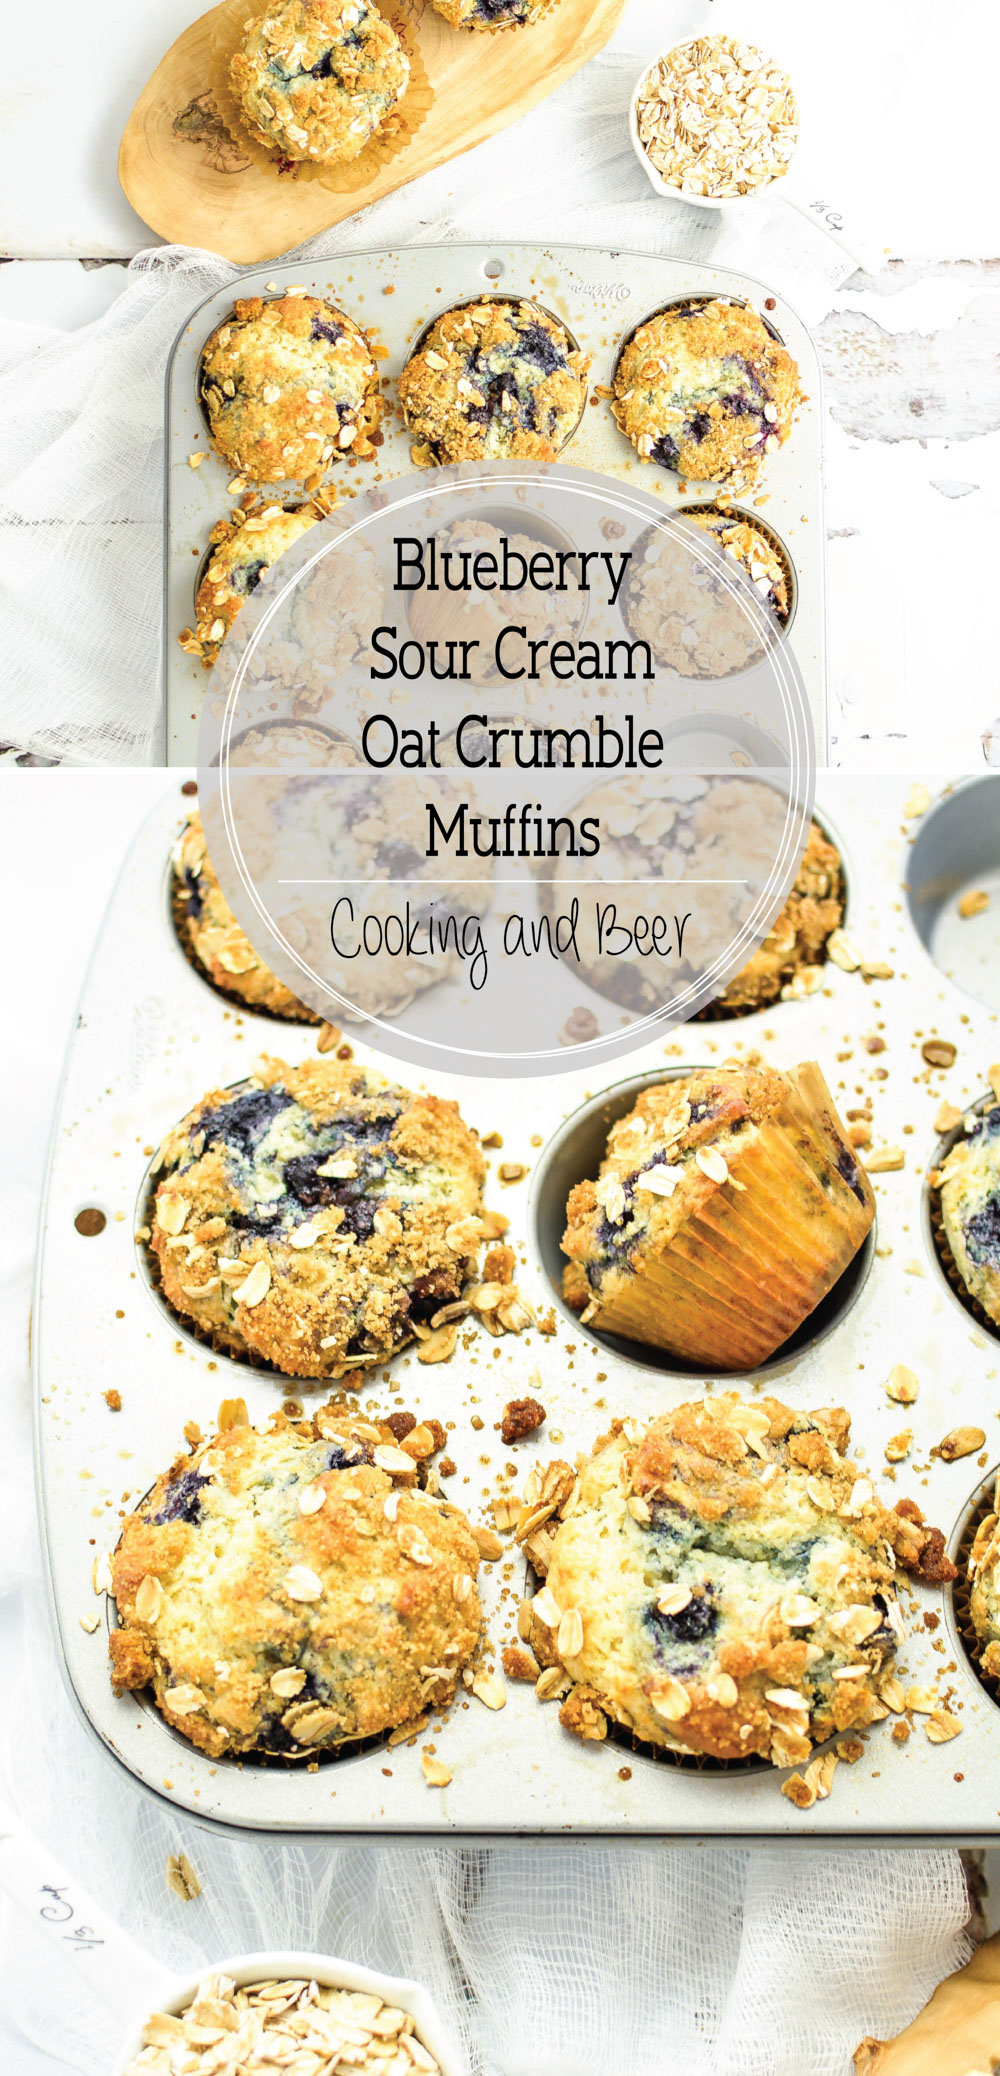 Blueberry Sour Cream Oat Crumble Muffins are the perfect sweet treat and quick breakfast solution!